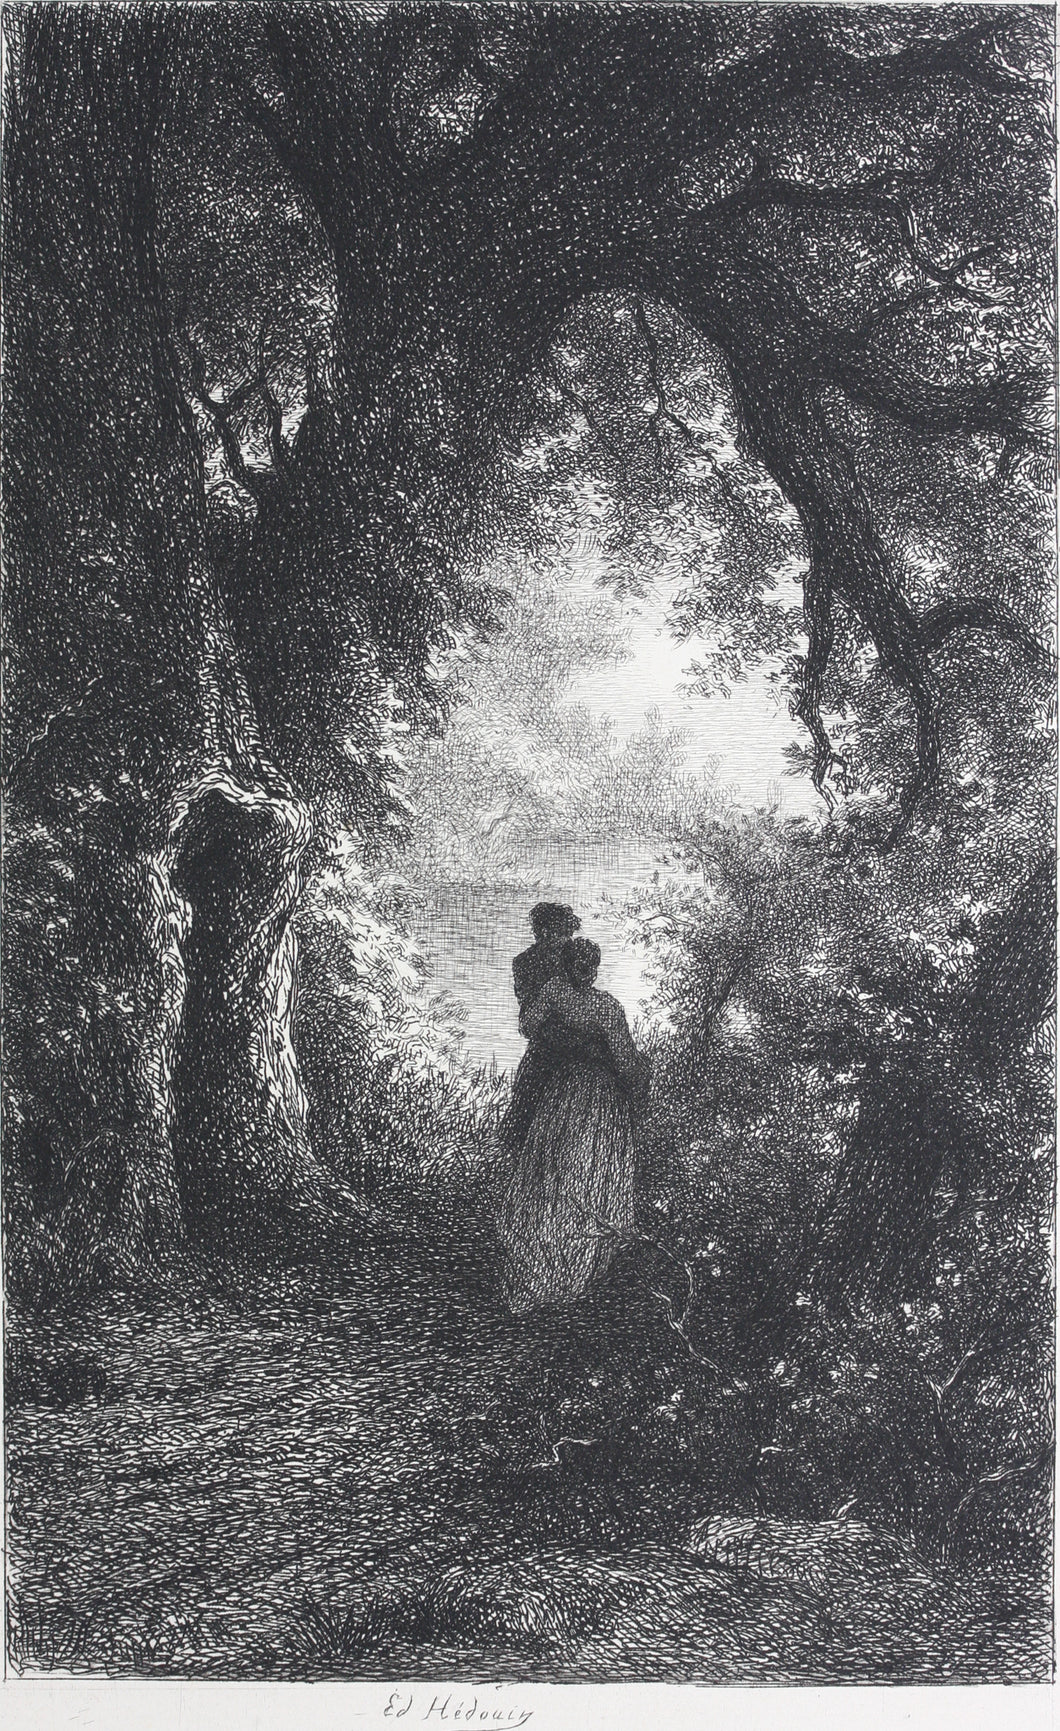 Edmond Hédouin. Silence and Night of the Woods. Etching. 1868.